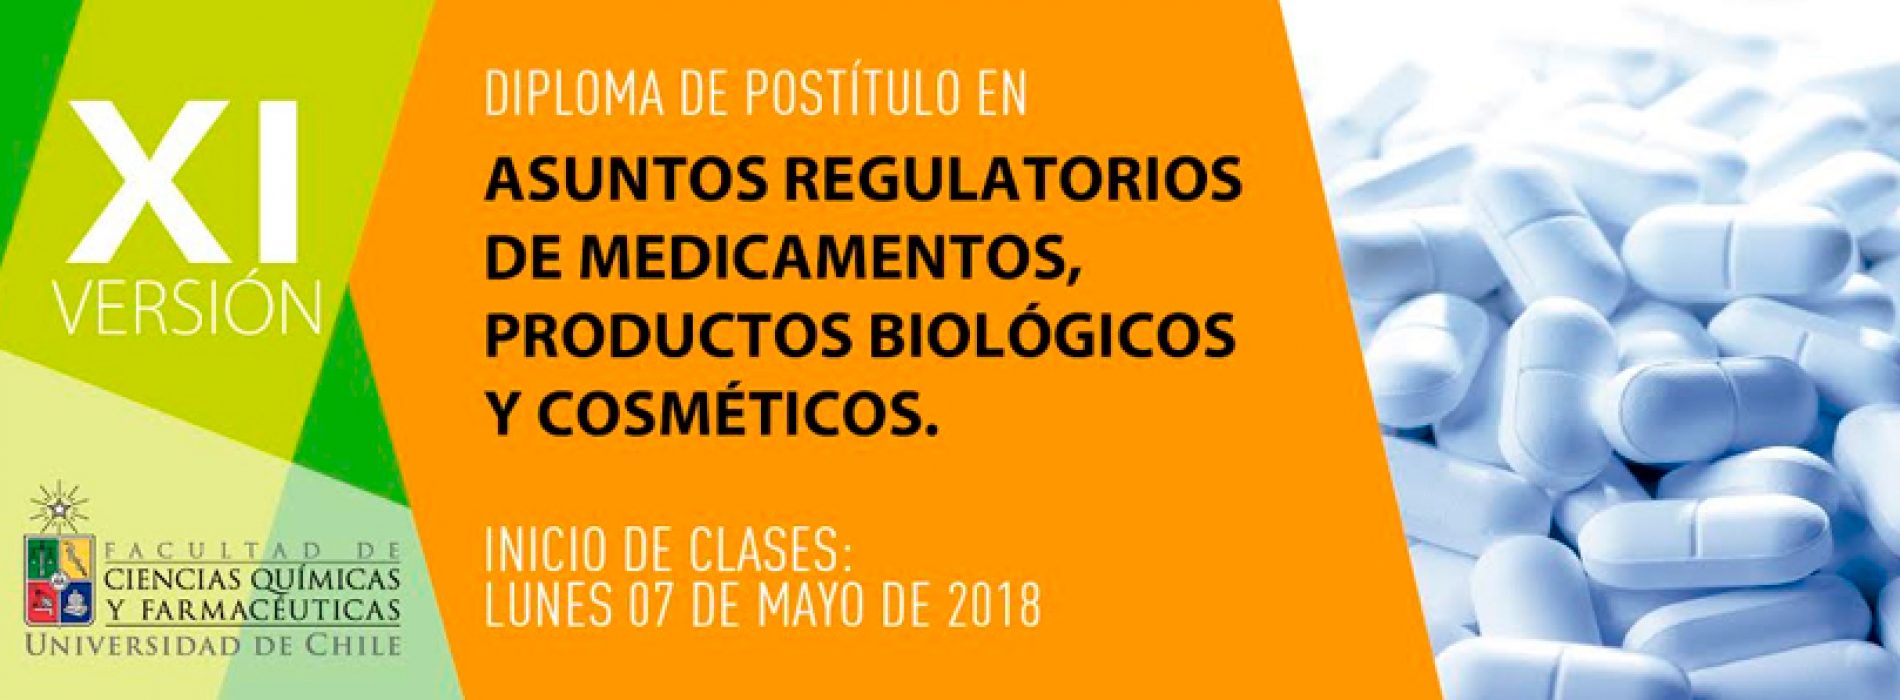 Apply to the Diploma in matters regulatory of the FCQyF of the University of Chile